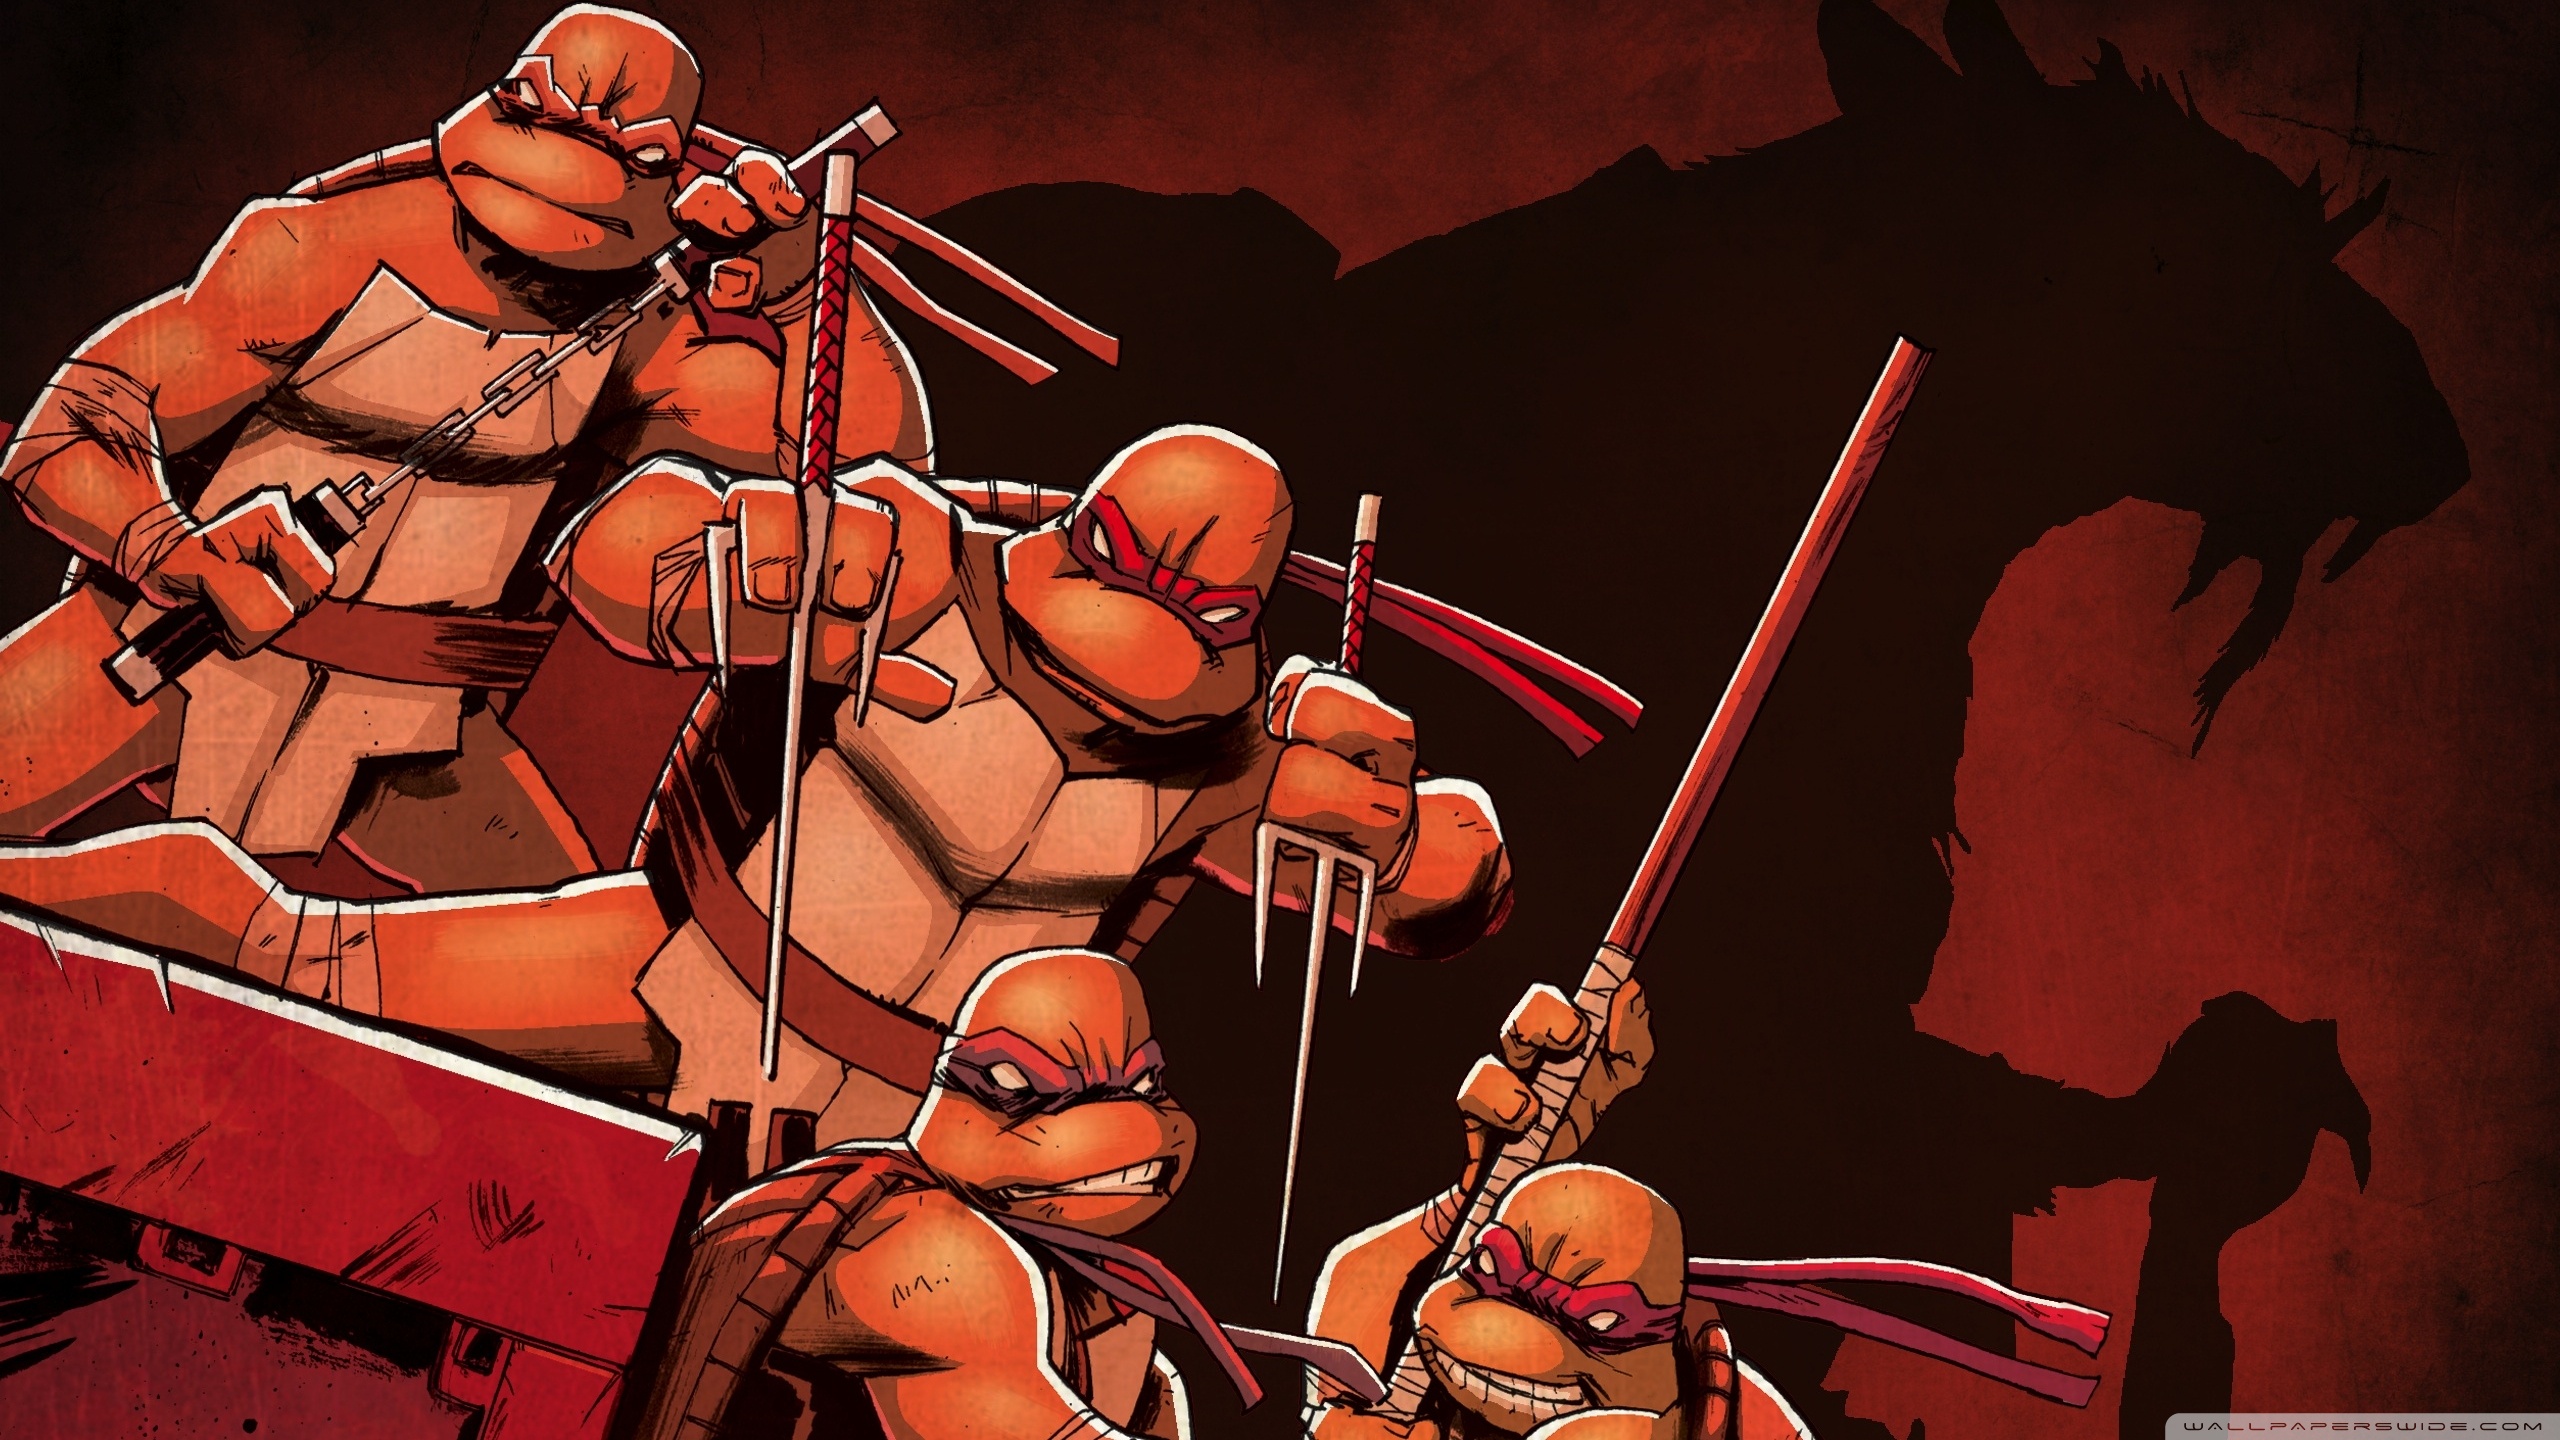 Tmnt Pictures 2048 Pixels Wide And 1152 Pixels Tall - HD Wallpaper 